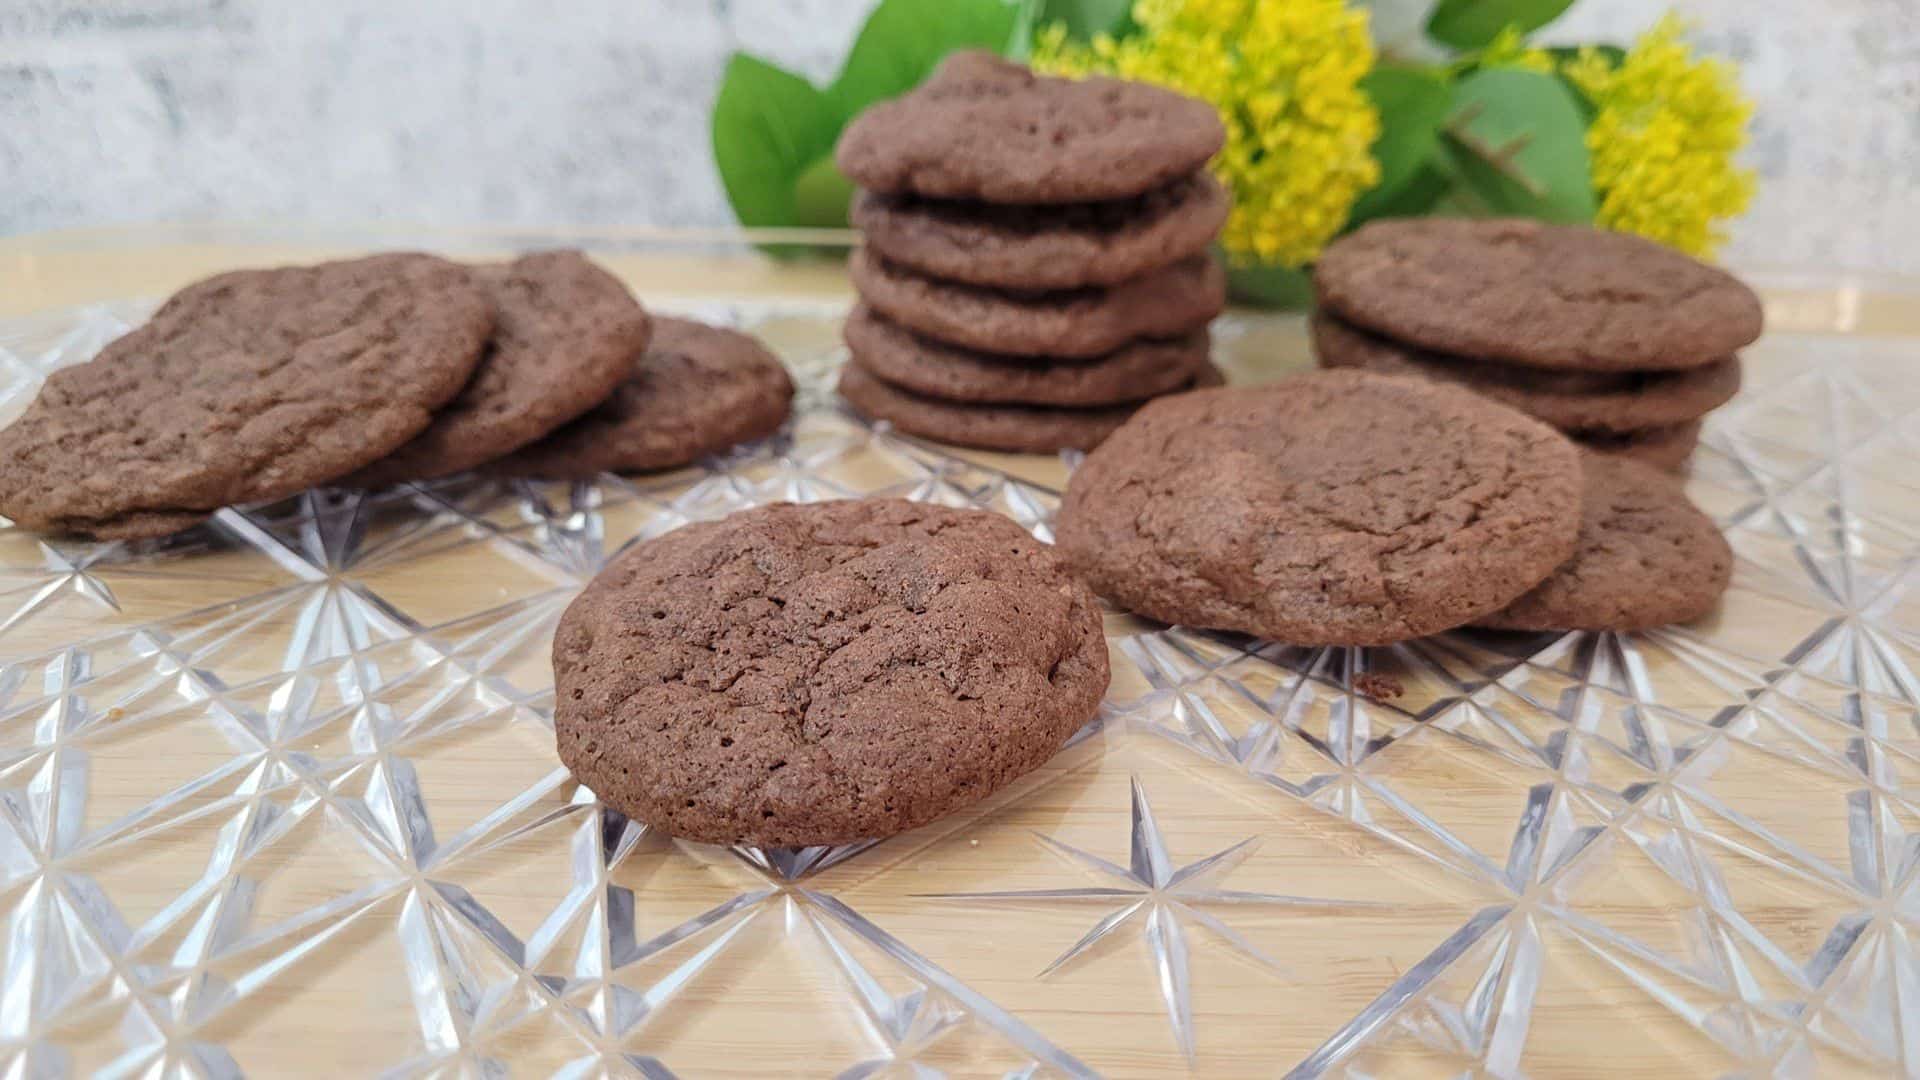 gluten free chocolate walnut cookies on a platter with flowers in background